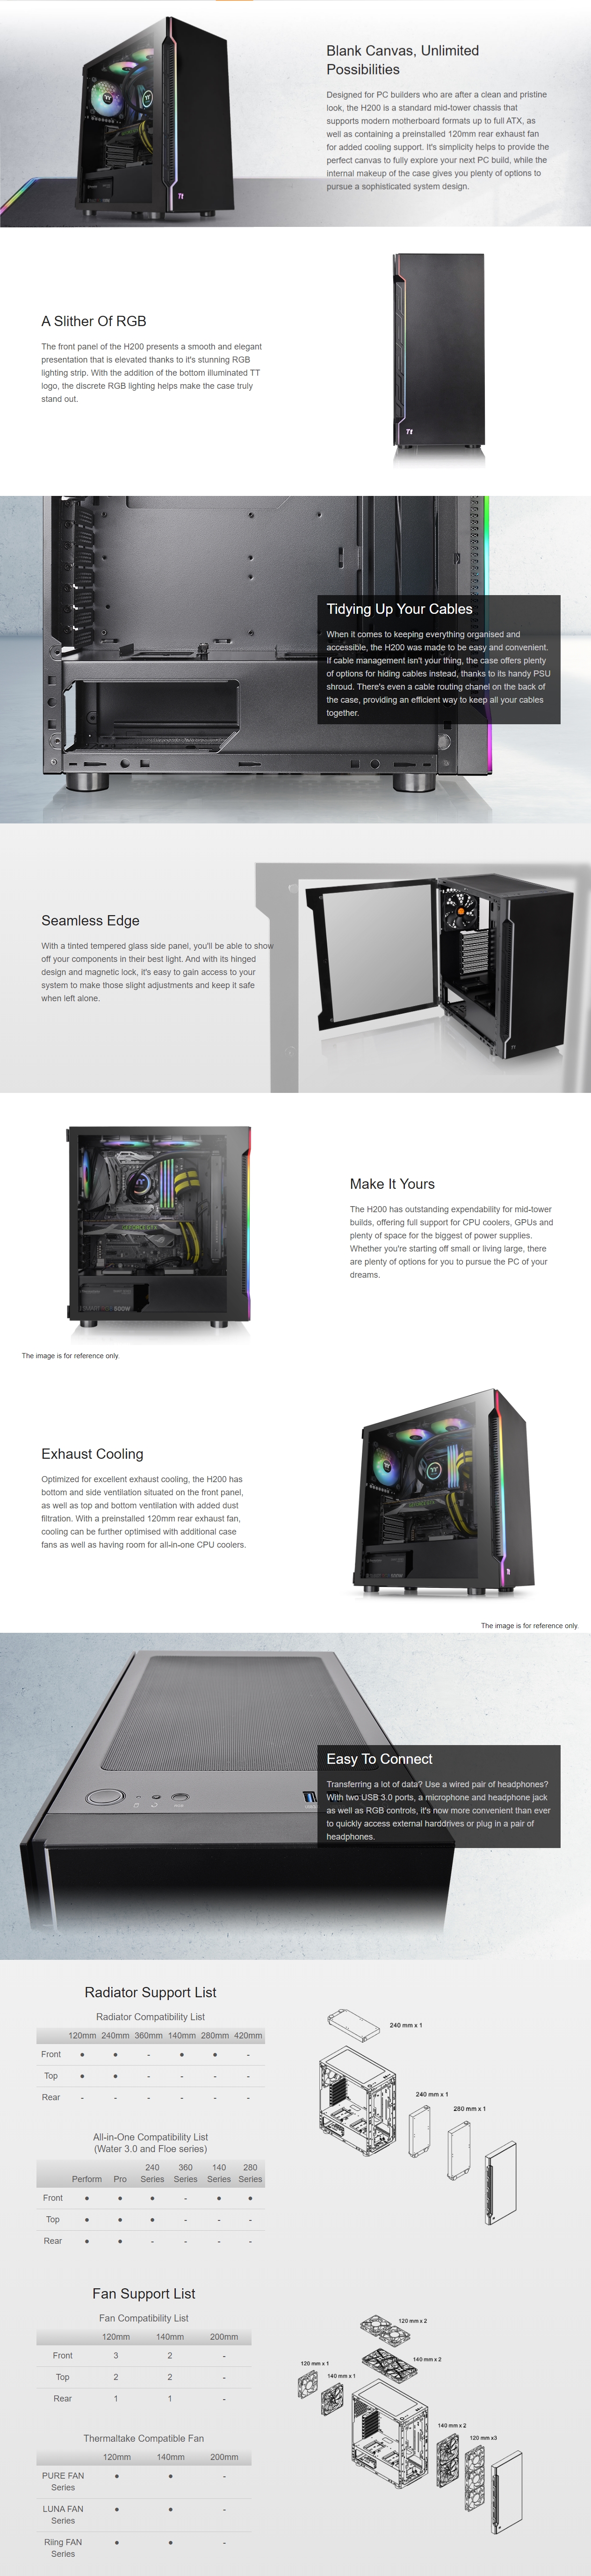 A large marketing image providing additional information about the product Thermaltake H200 Mid Tower Case - Black - Additional alt info not provided